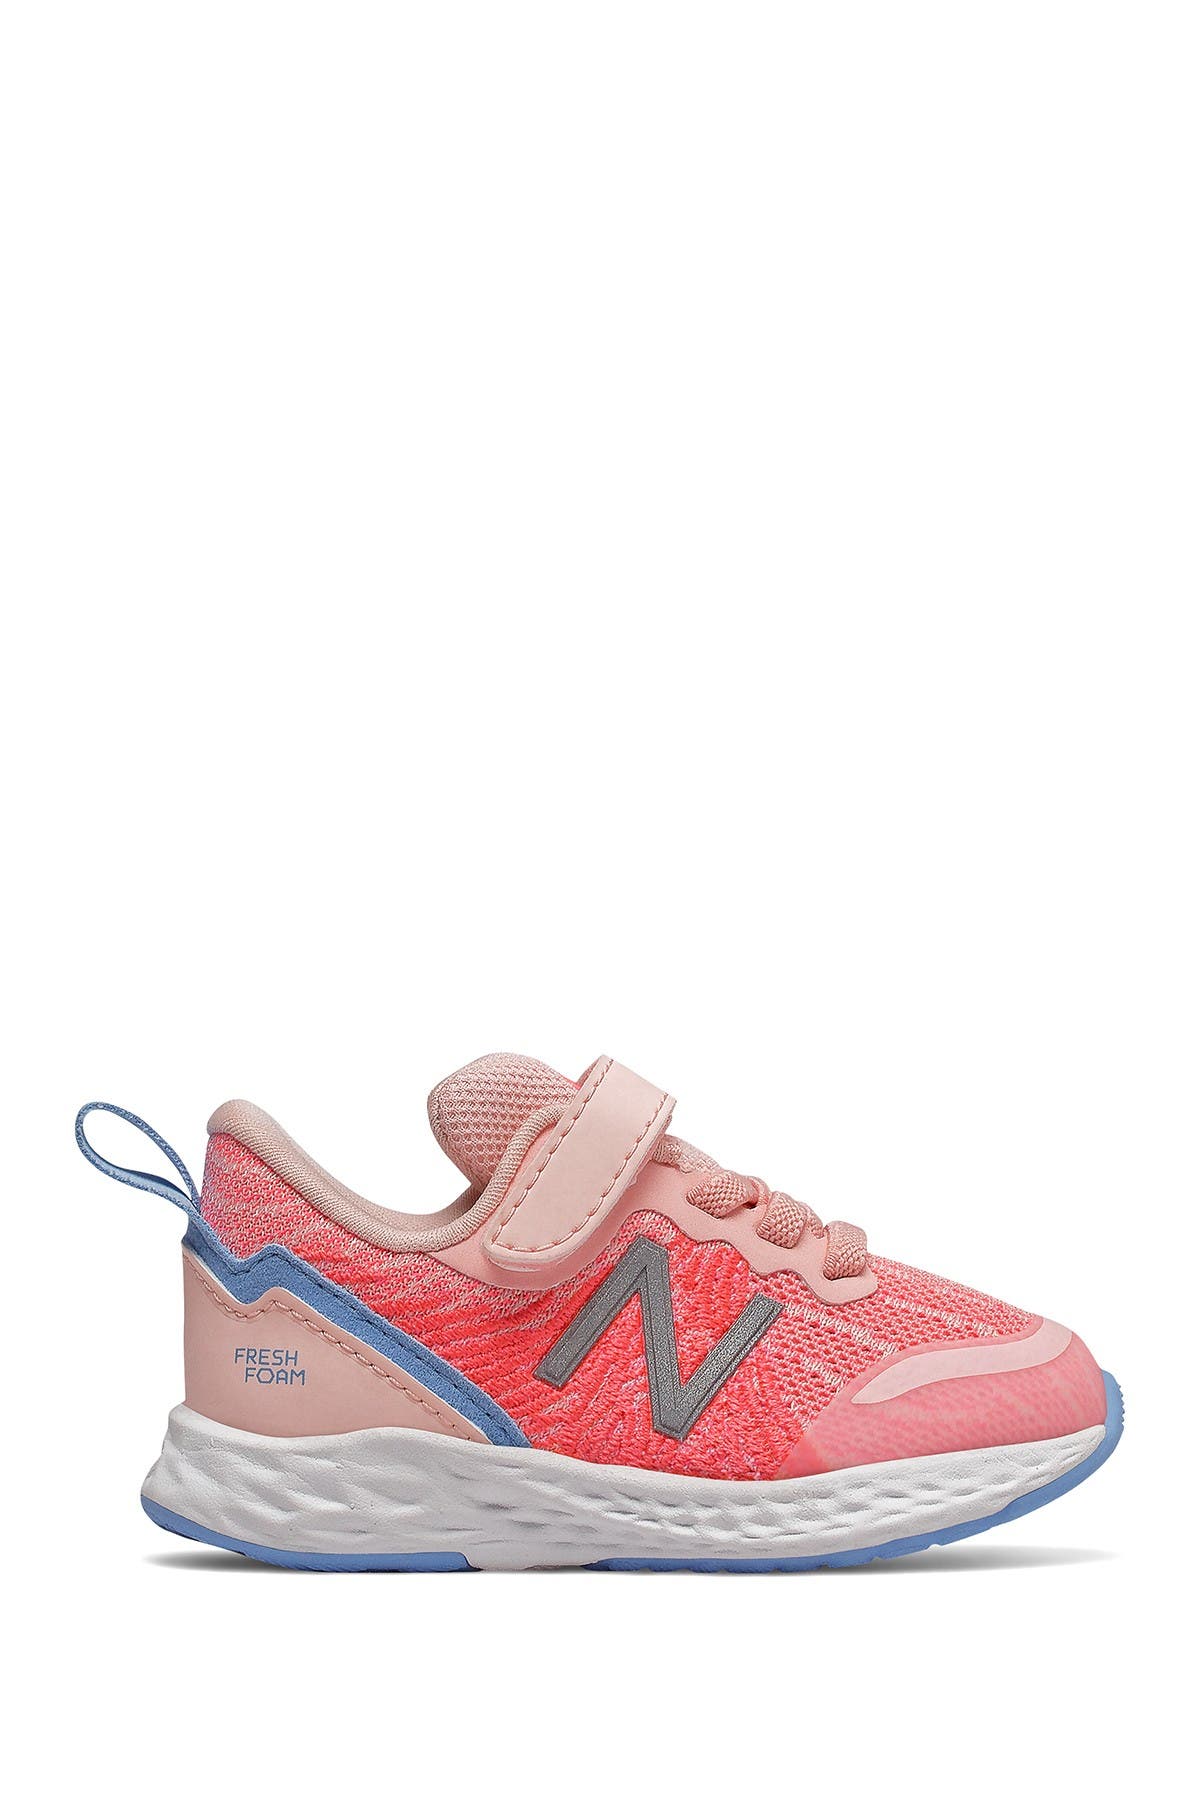 new balance toddler shoes wide width